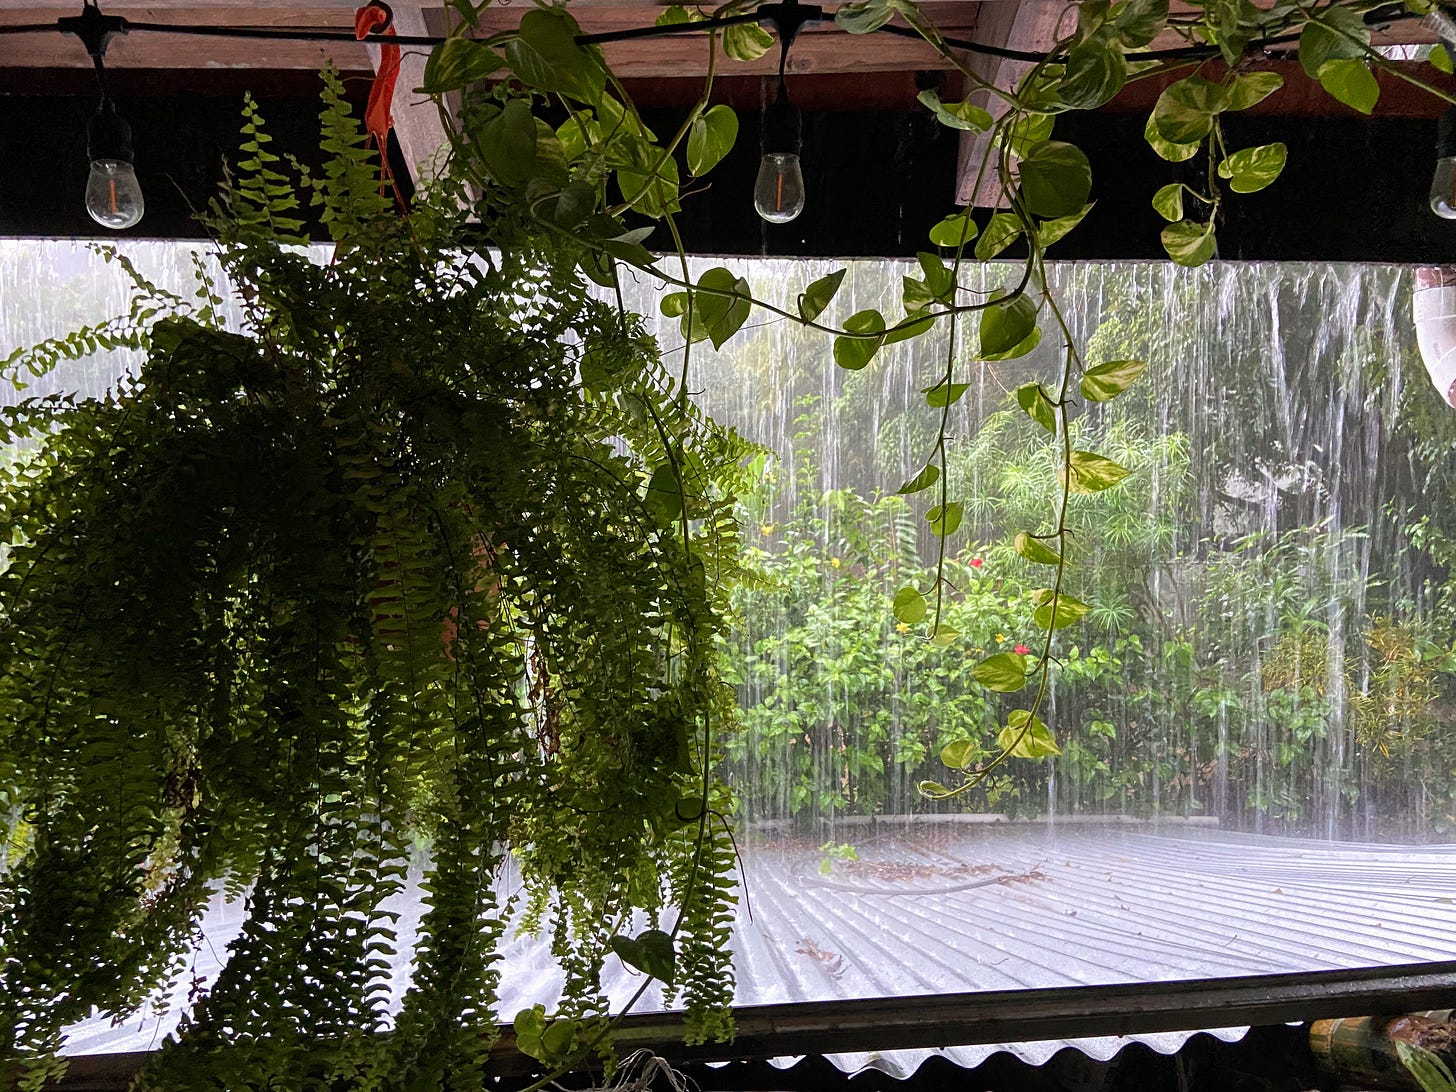 Hanging plant under eaves, in the rain